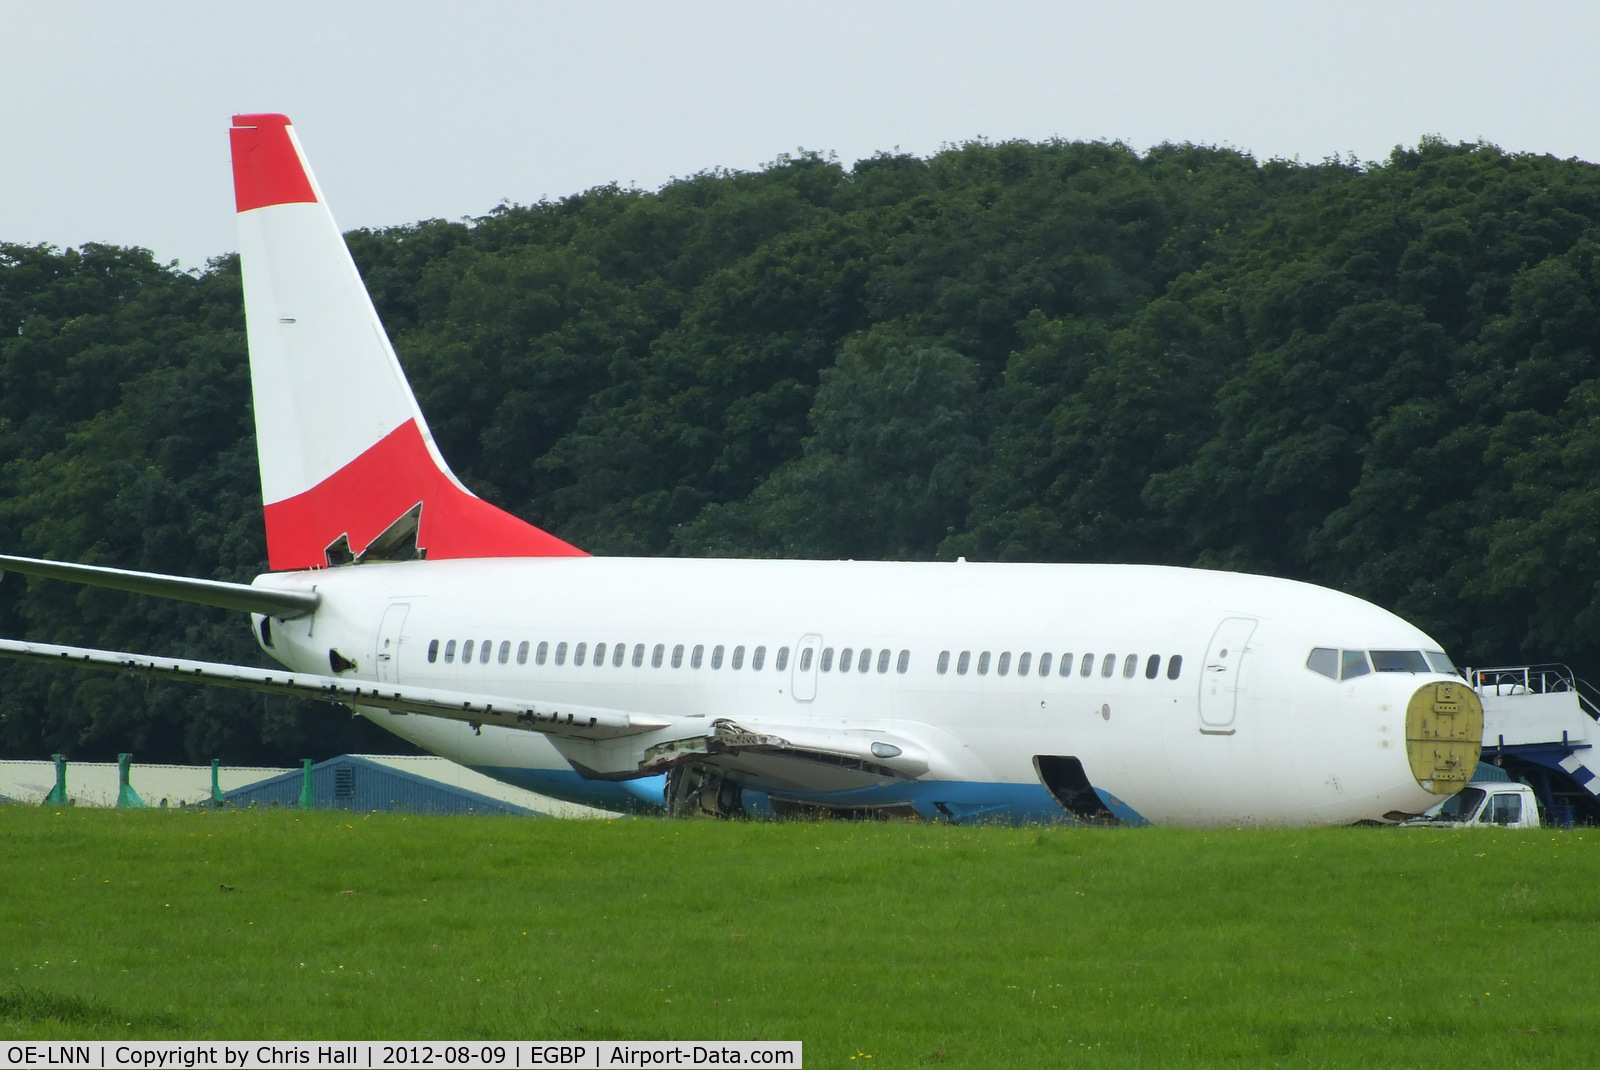 OE-LNN, 2000 Boeing 737-7Z9 C/N 30418, ex Austrian Airlines B737, only 11 years old and being parted out by ASI at Kemble